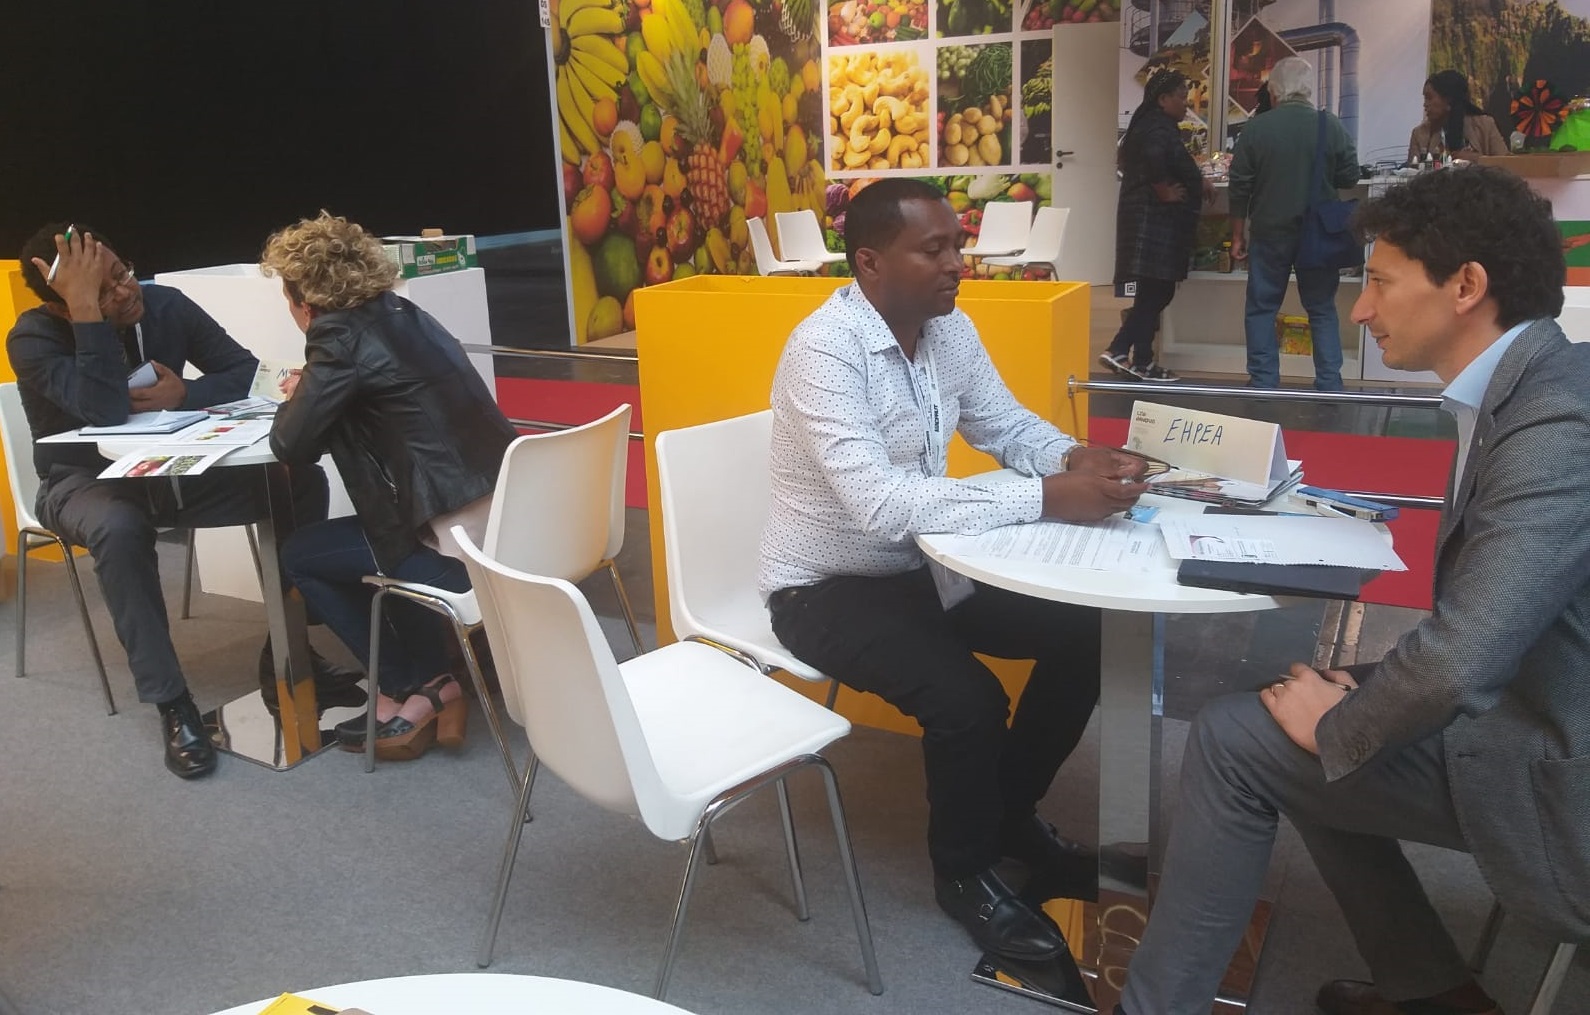 Macfrut Expo 2019 concluded